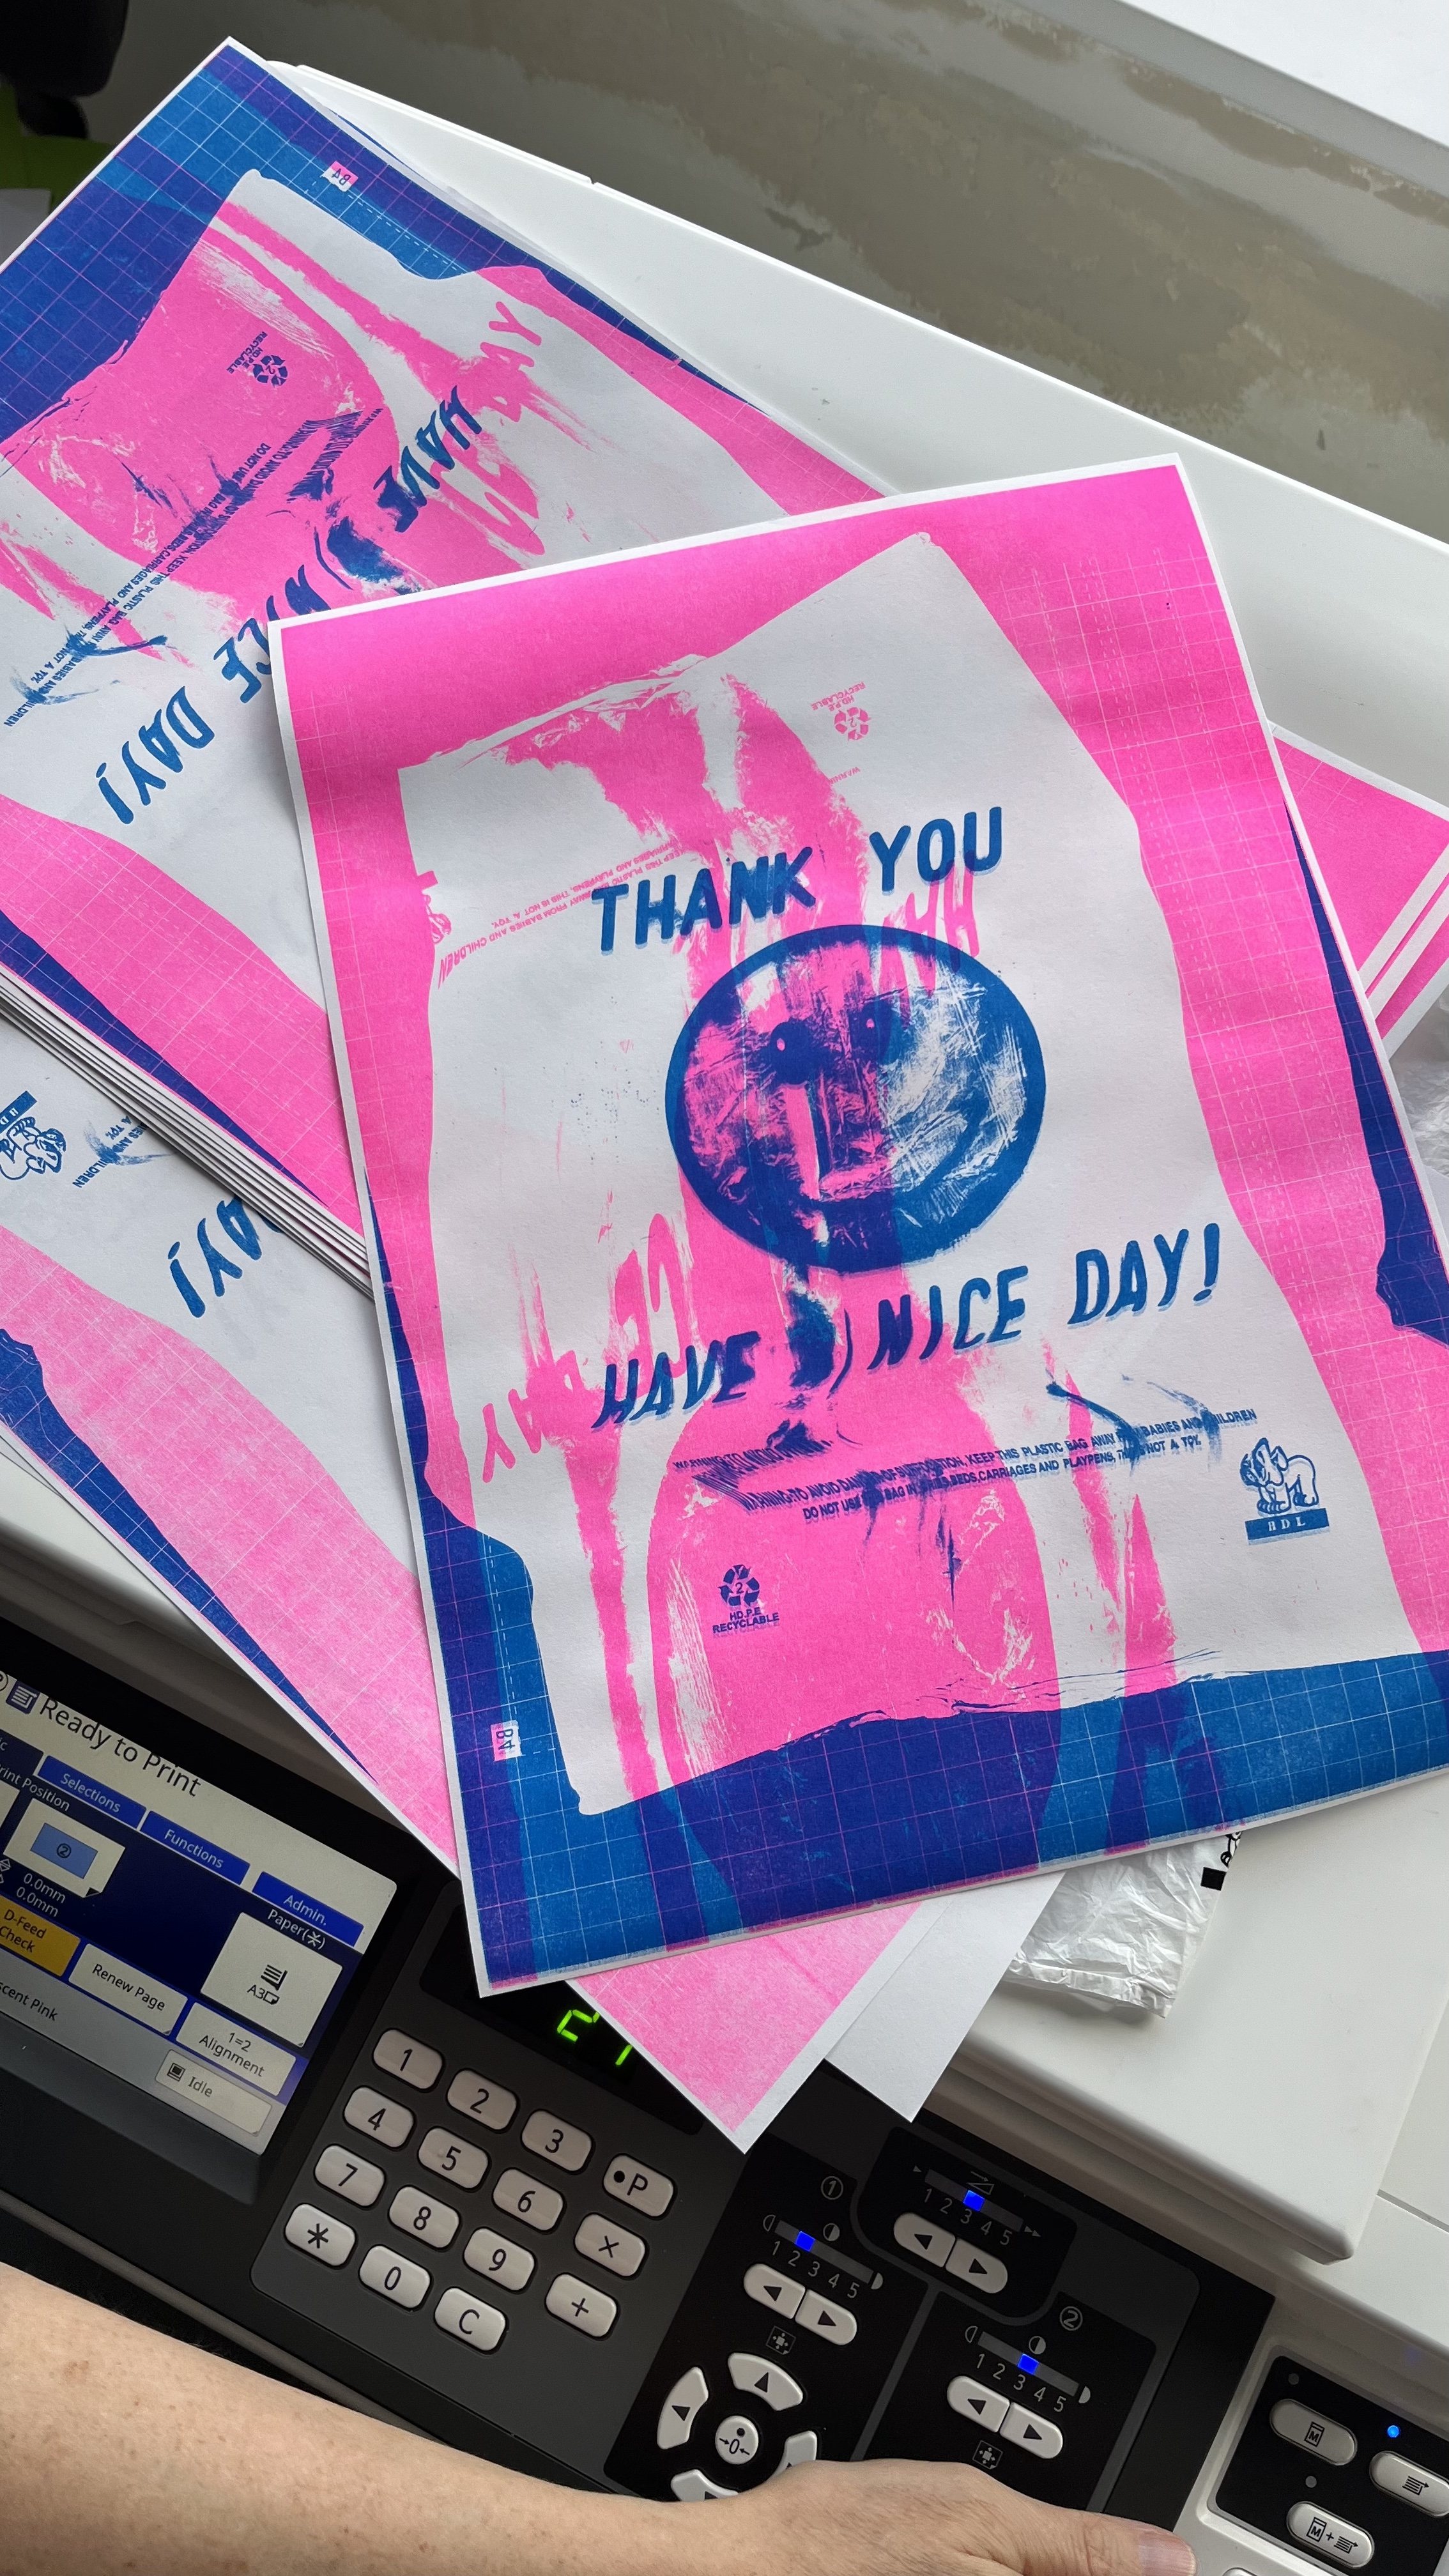 A fluorescent pink and teal risograph print of a plastic bag